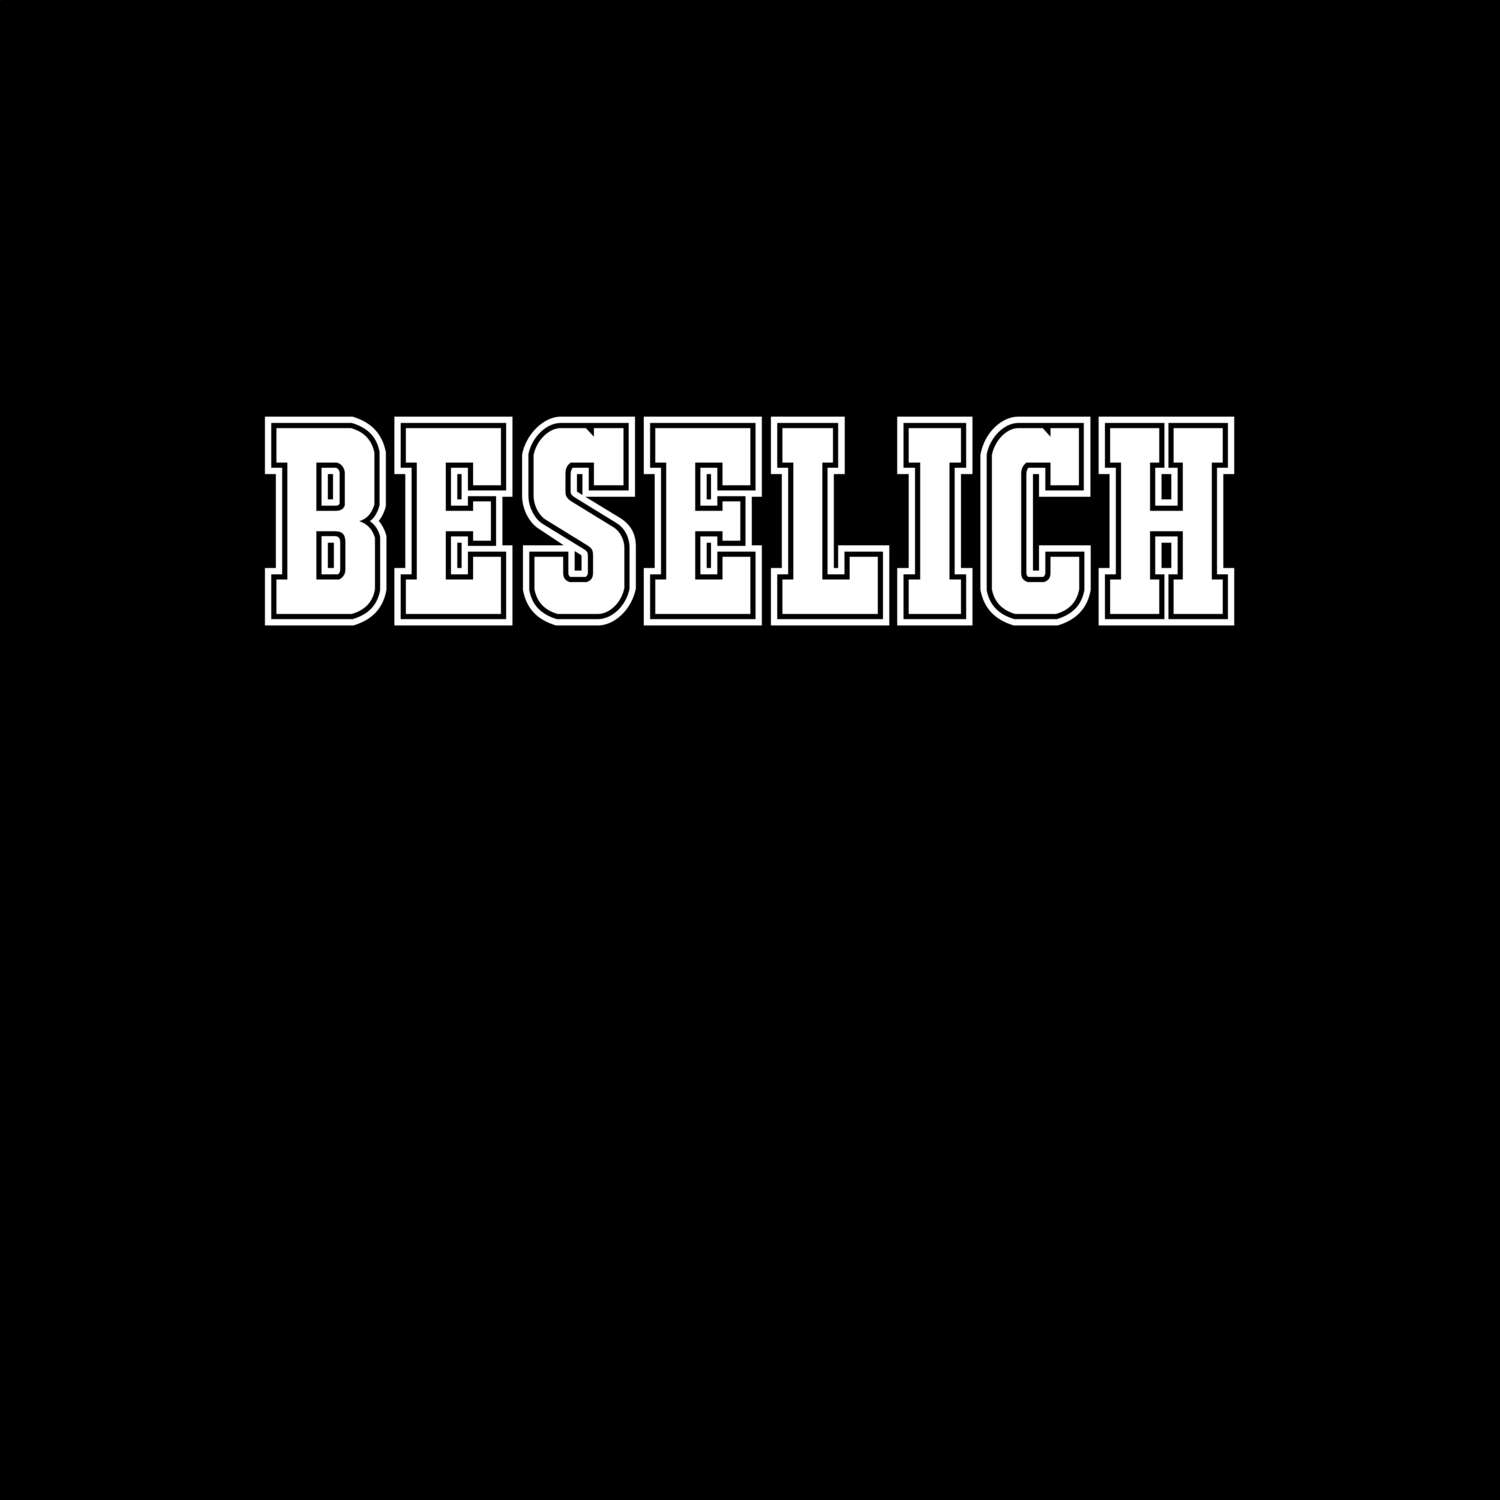 Beselich T-Shirt »Classic«